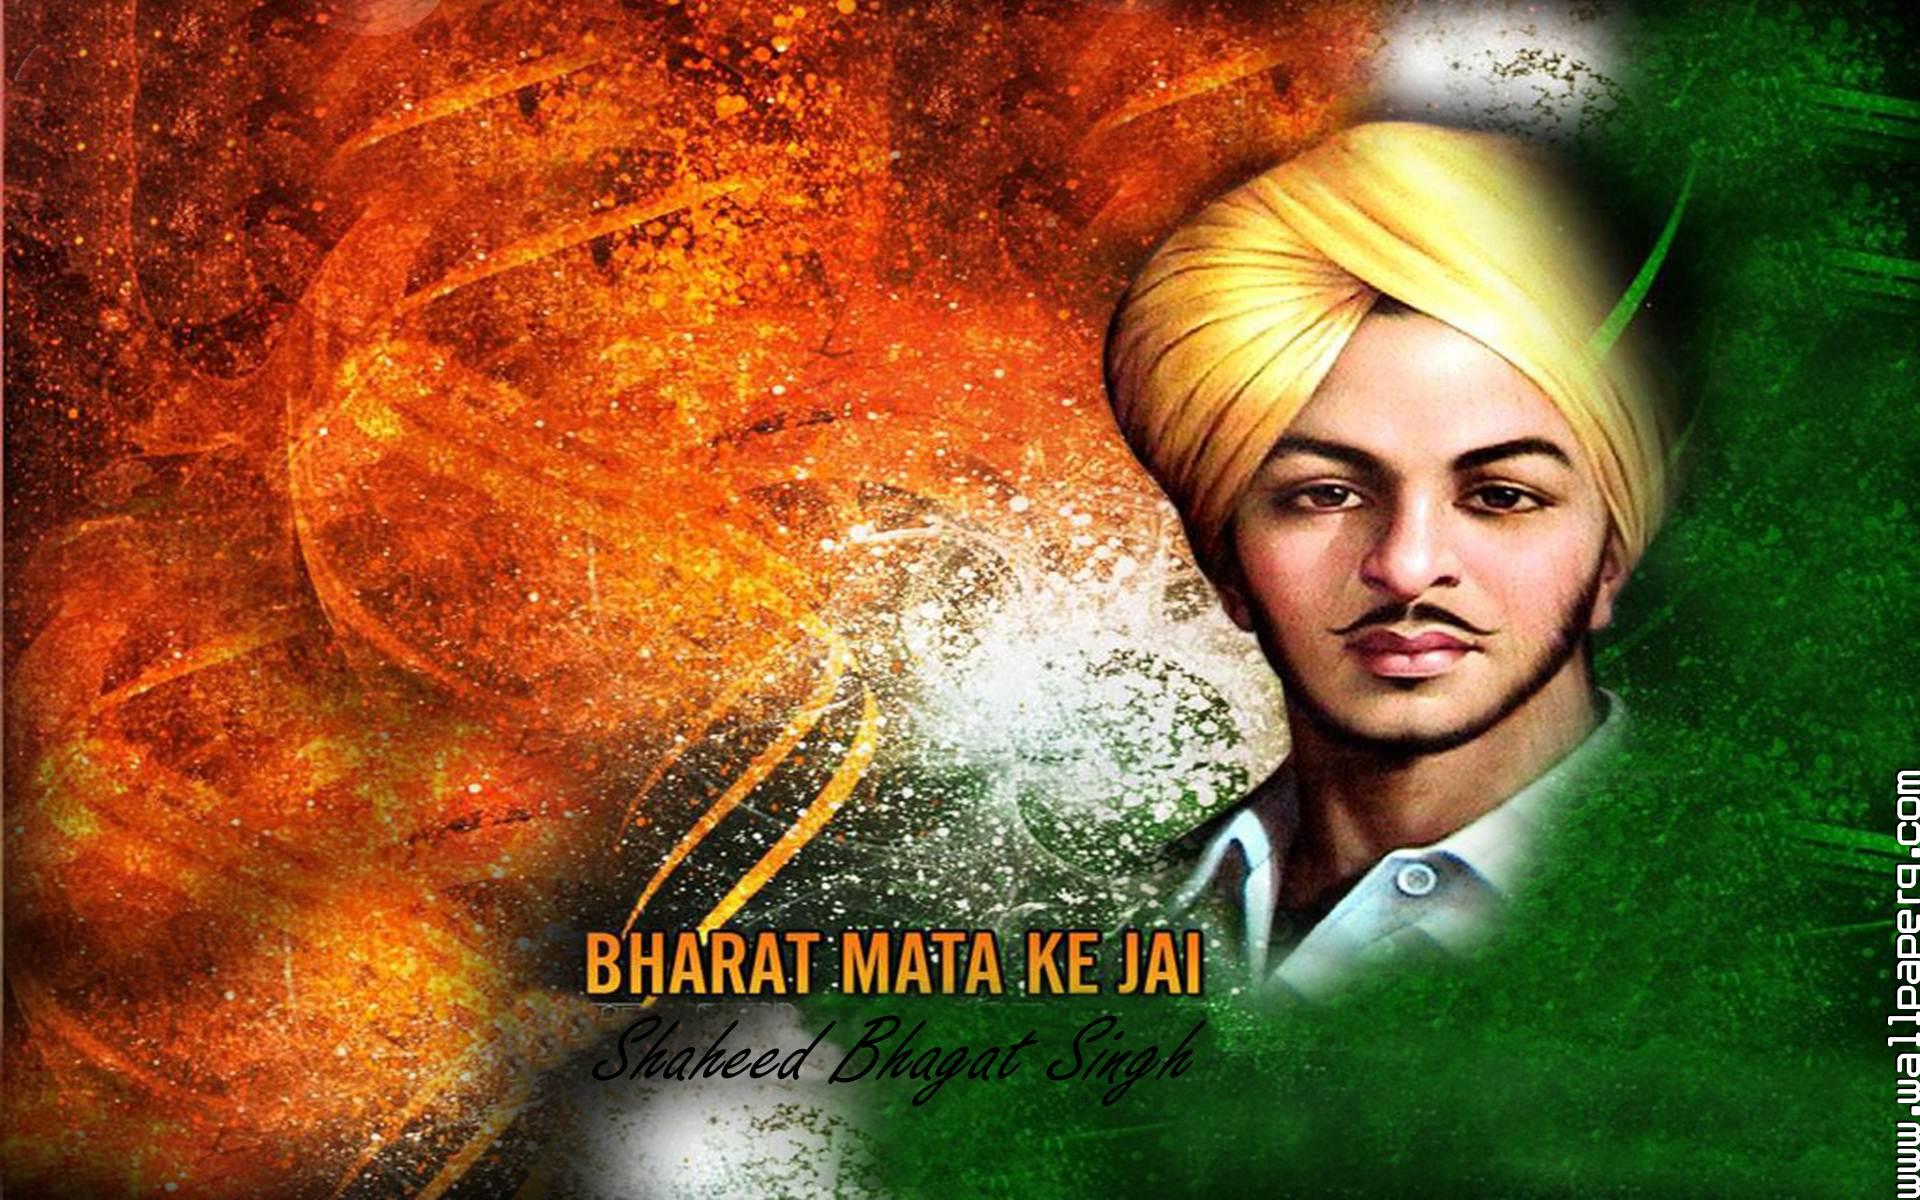 Download shaheed bhagat singh greetings for republic day